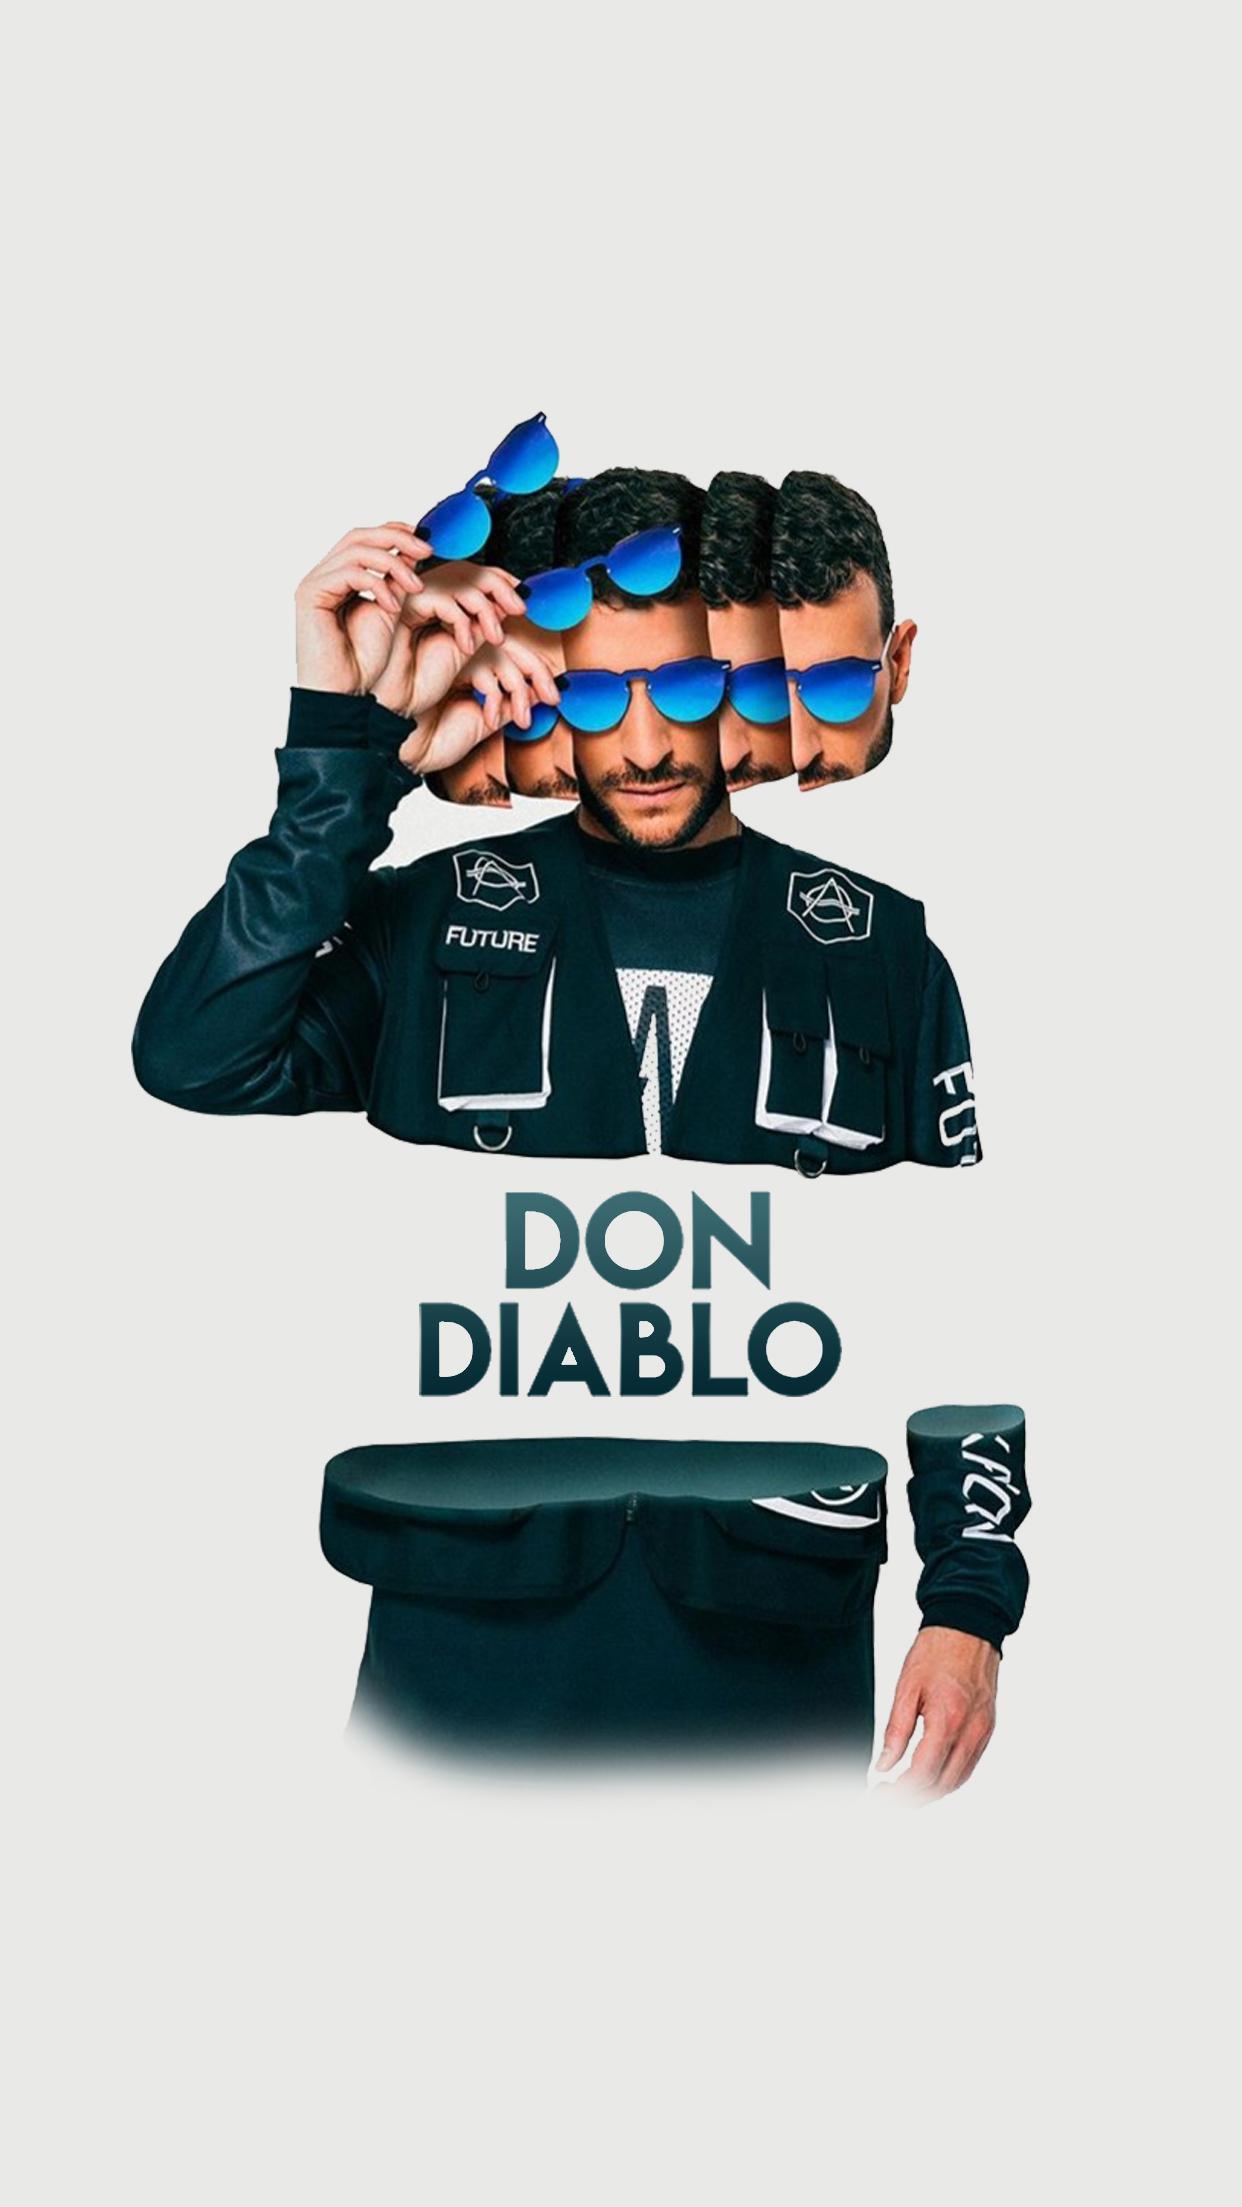 Quickly Edited This Don Diablo Forever Xl Poster Into A Wallpaper